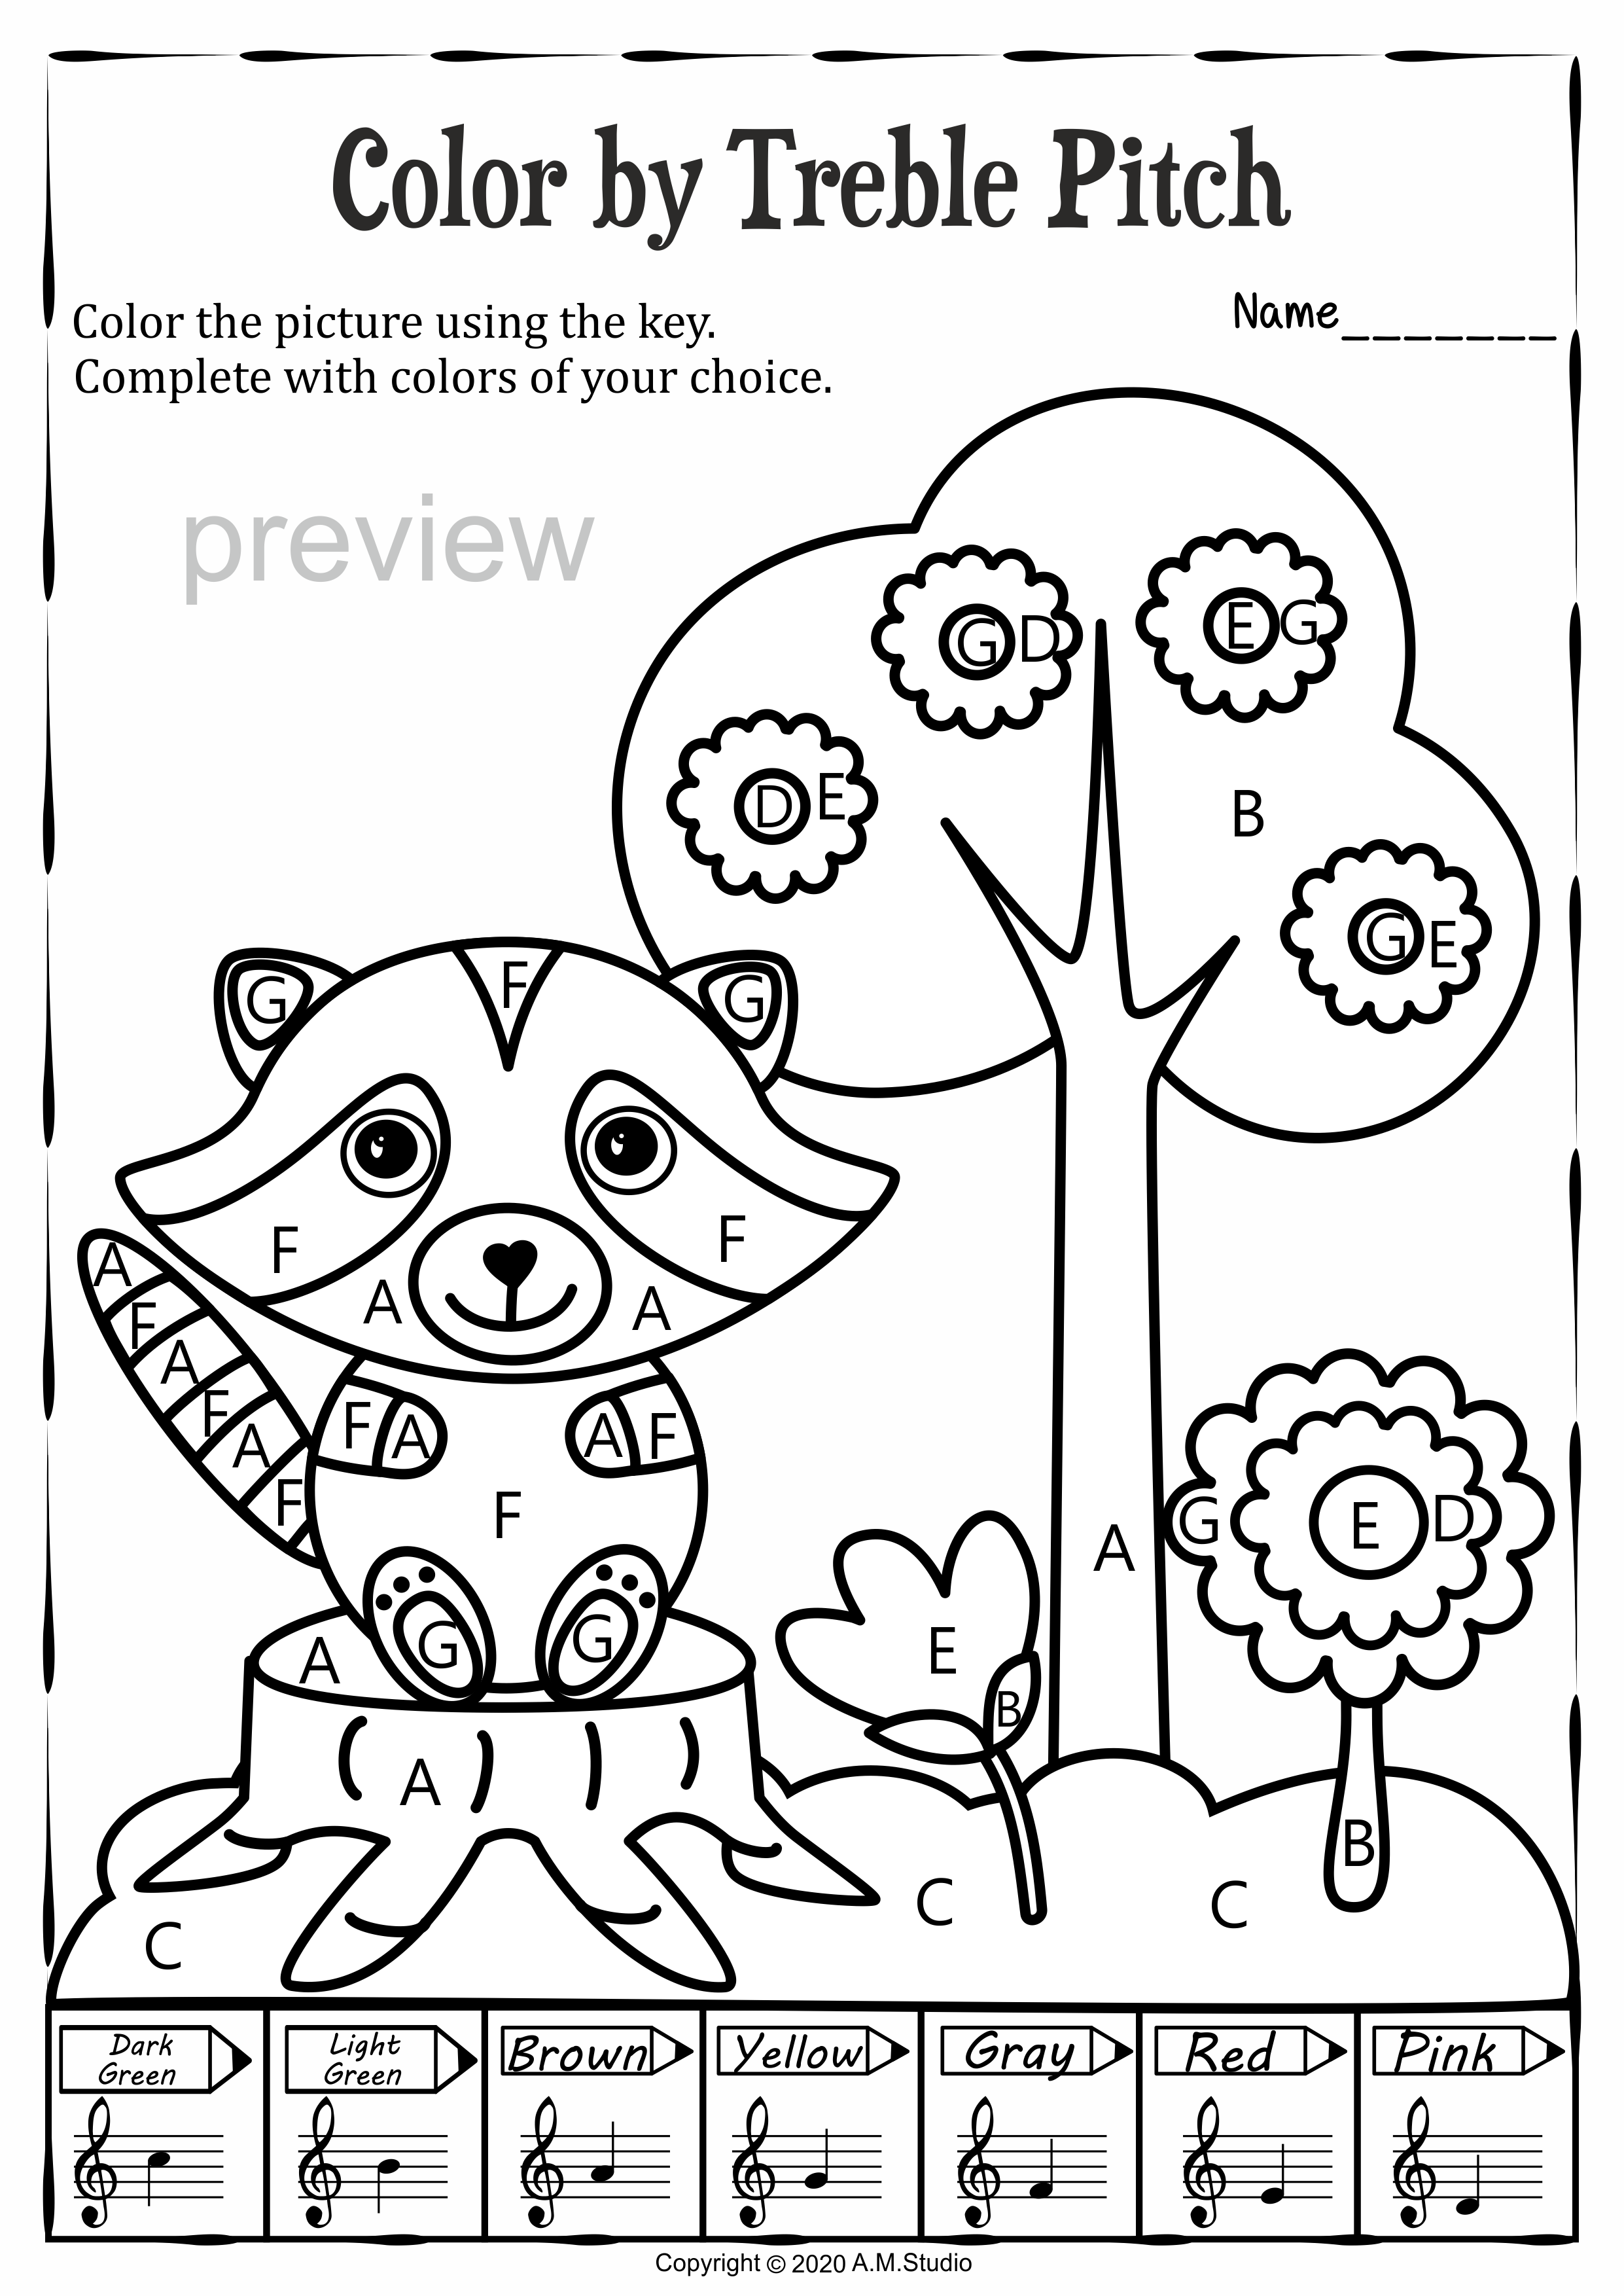 Musical Coloring Pages for Spring {Color by Treble Pitch} with answers (img # 5)